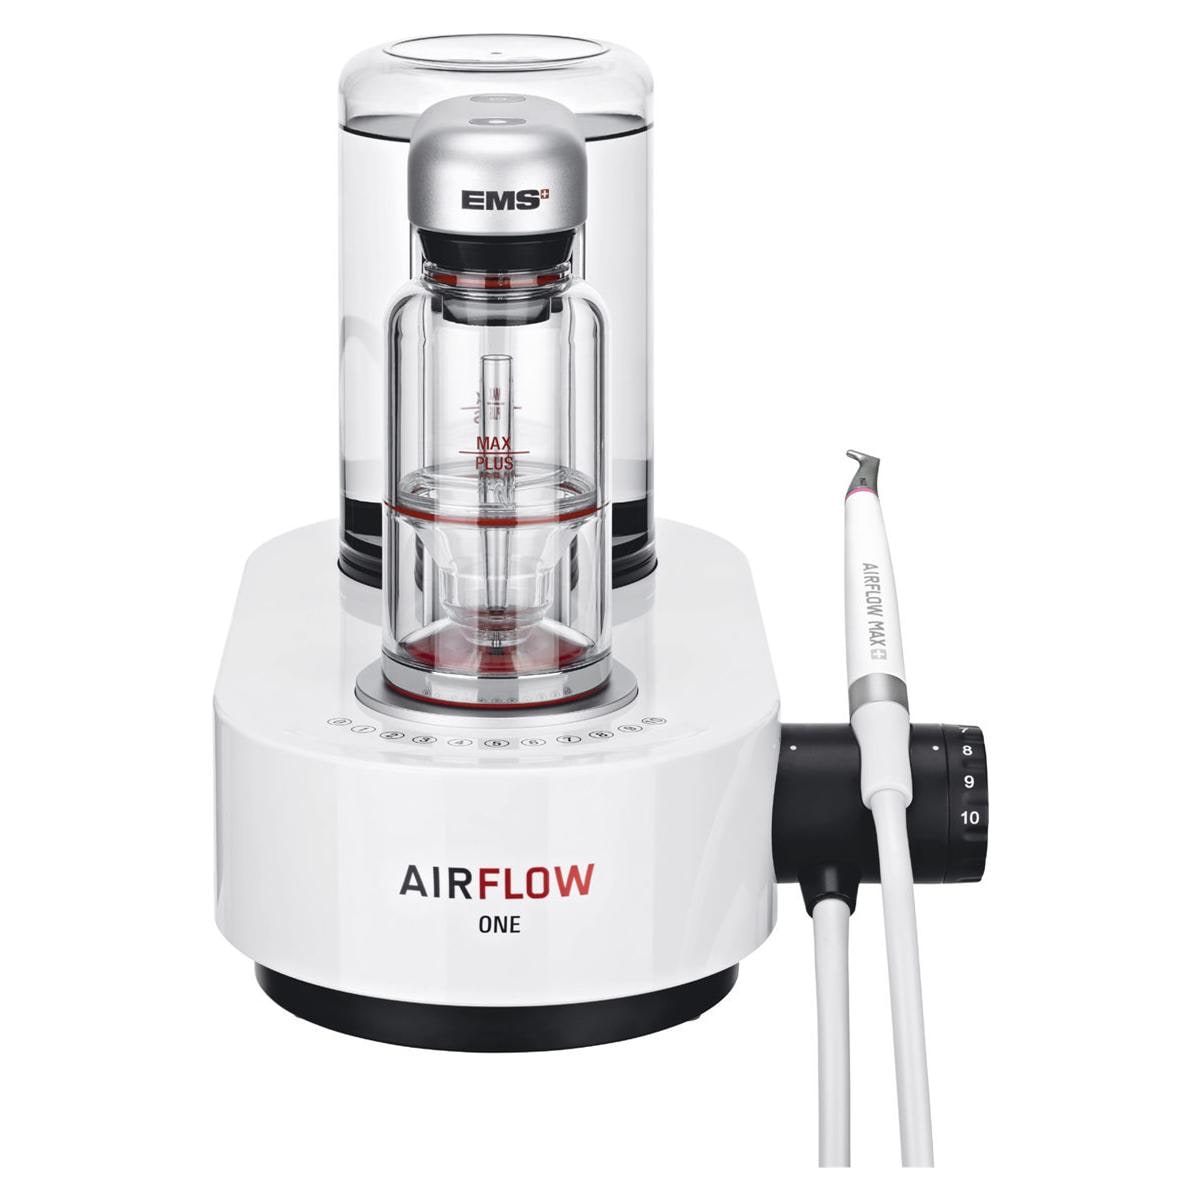 AIRFLOW ONE - FT-230 (209724)